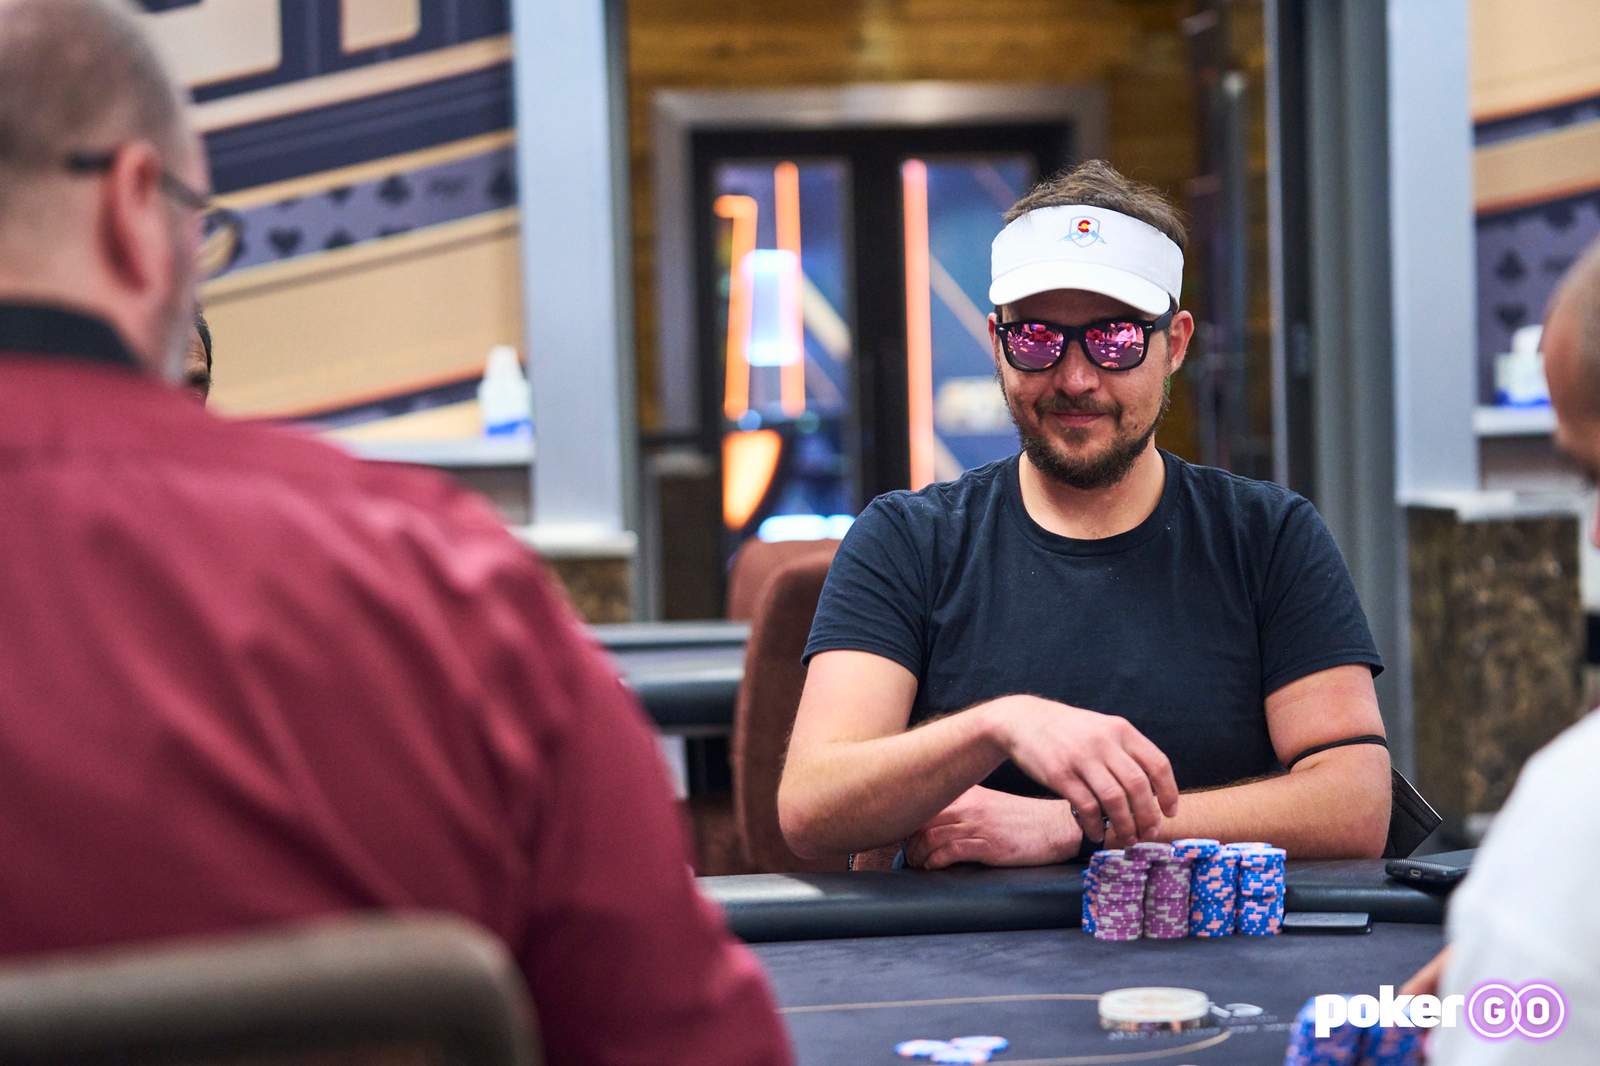 Jim Collopy Leads 2023 PGT PLO Series II Event #1 Final Table